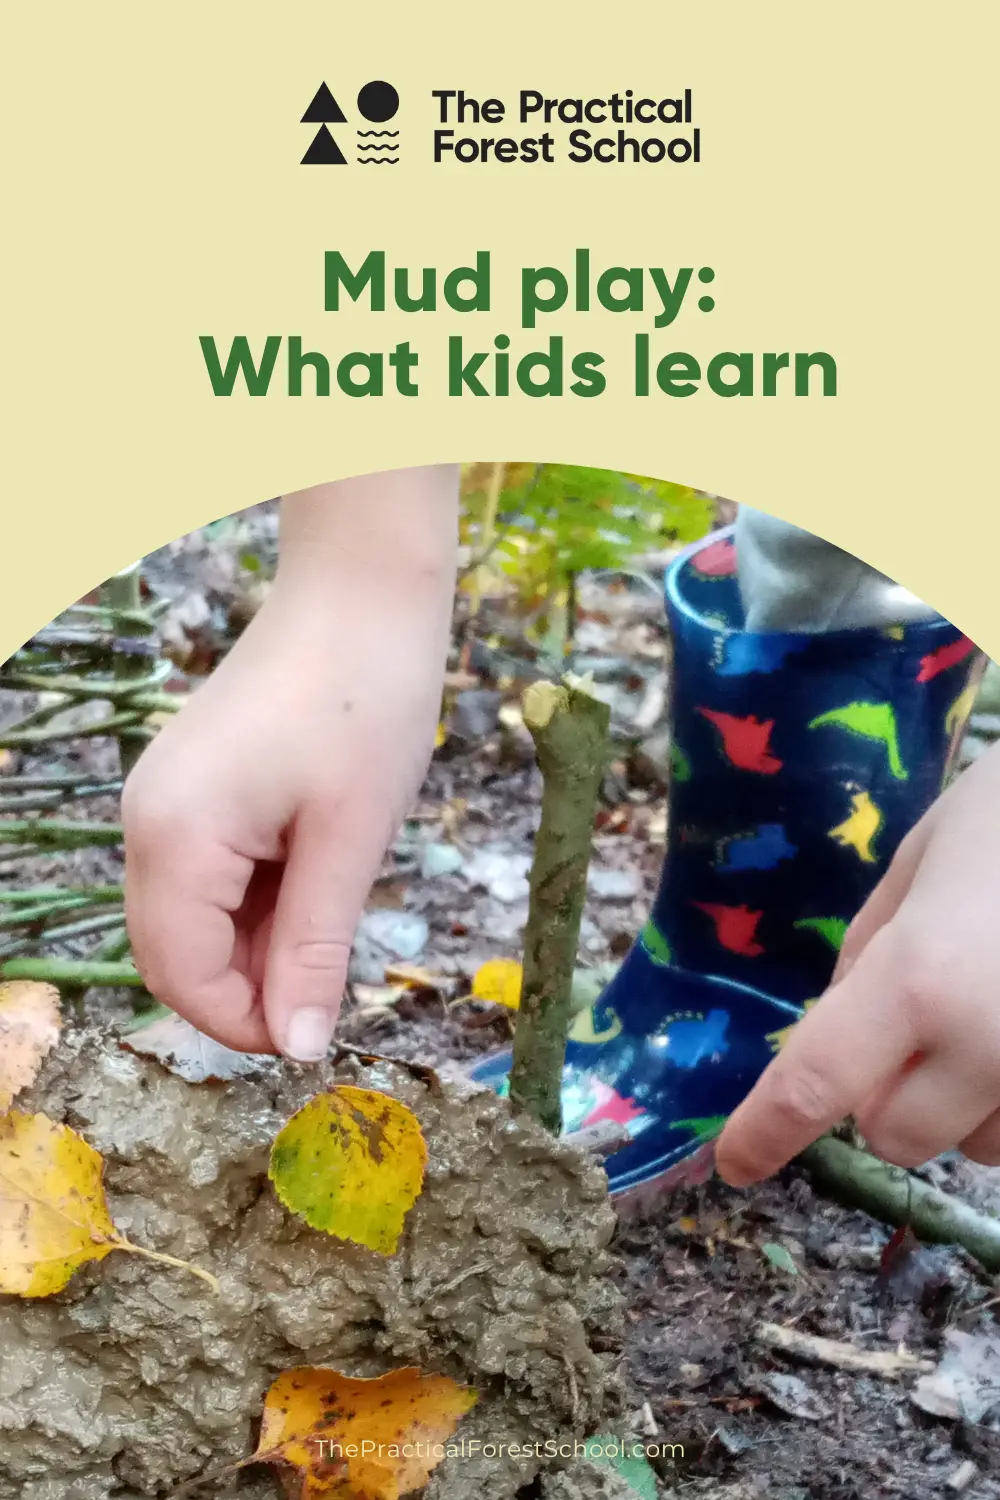 Child playing with mud and leaves